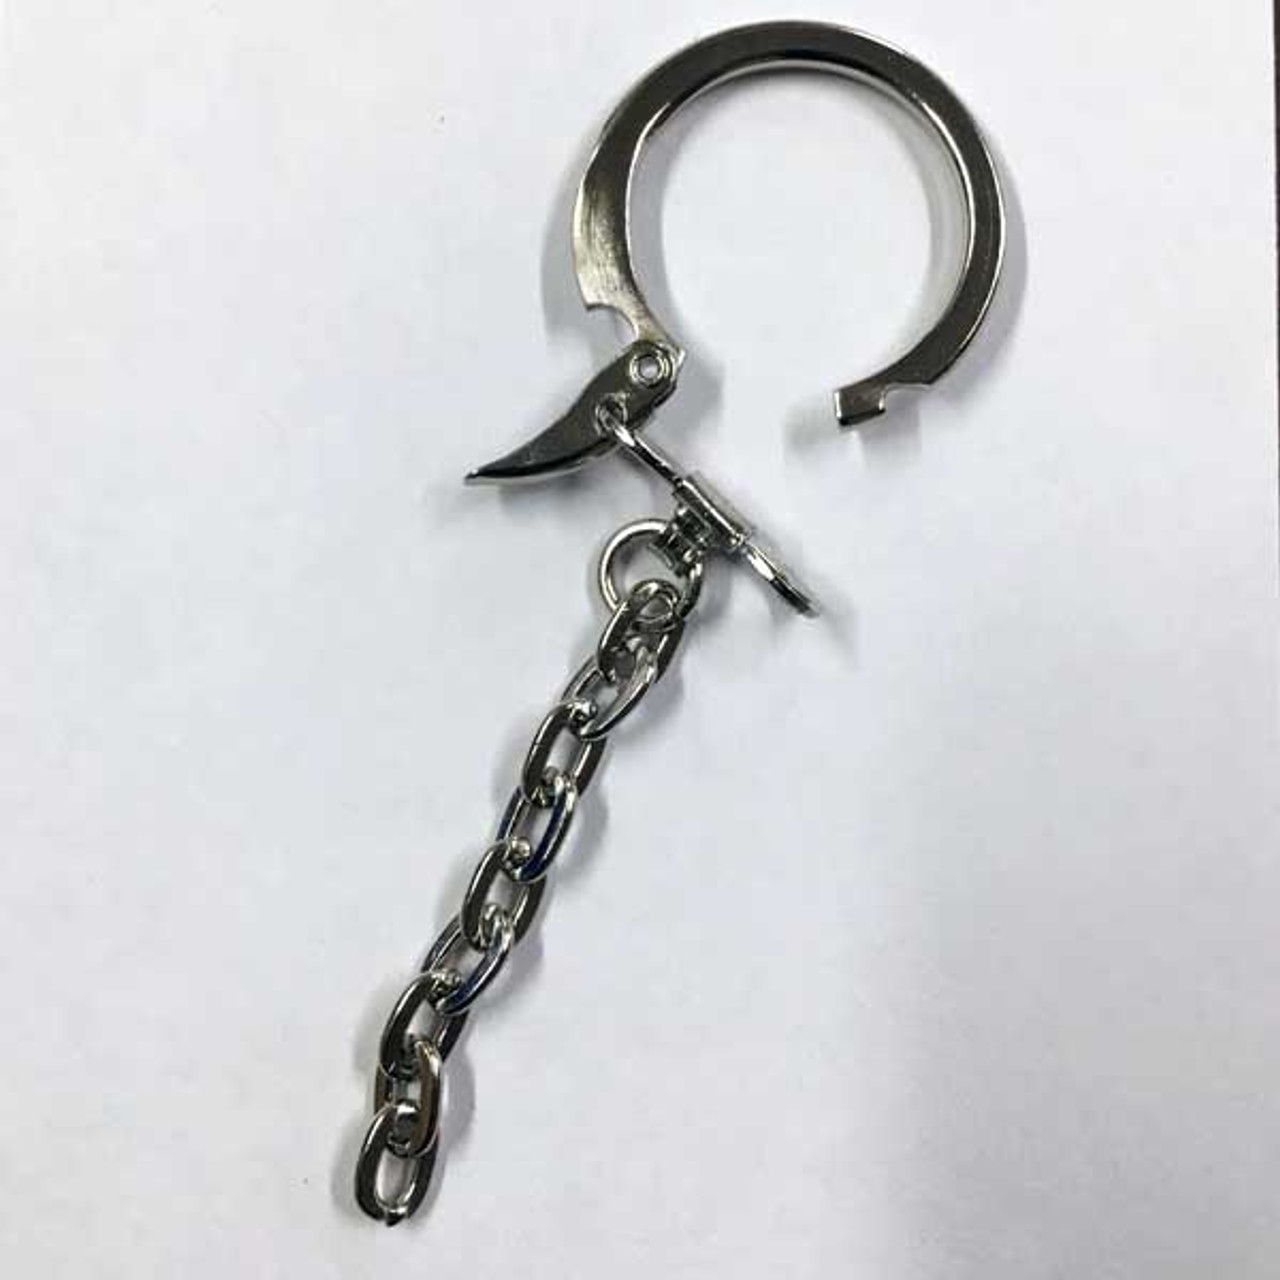 Ranchmark OX141 Keyring Magic to Open Those Pesky Keyrings with Ease